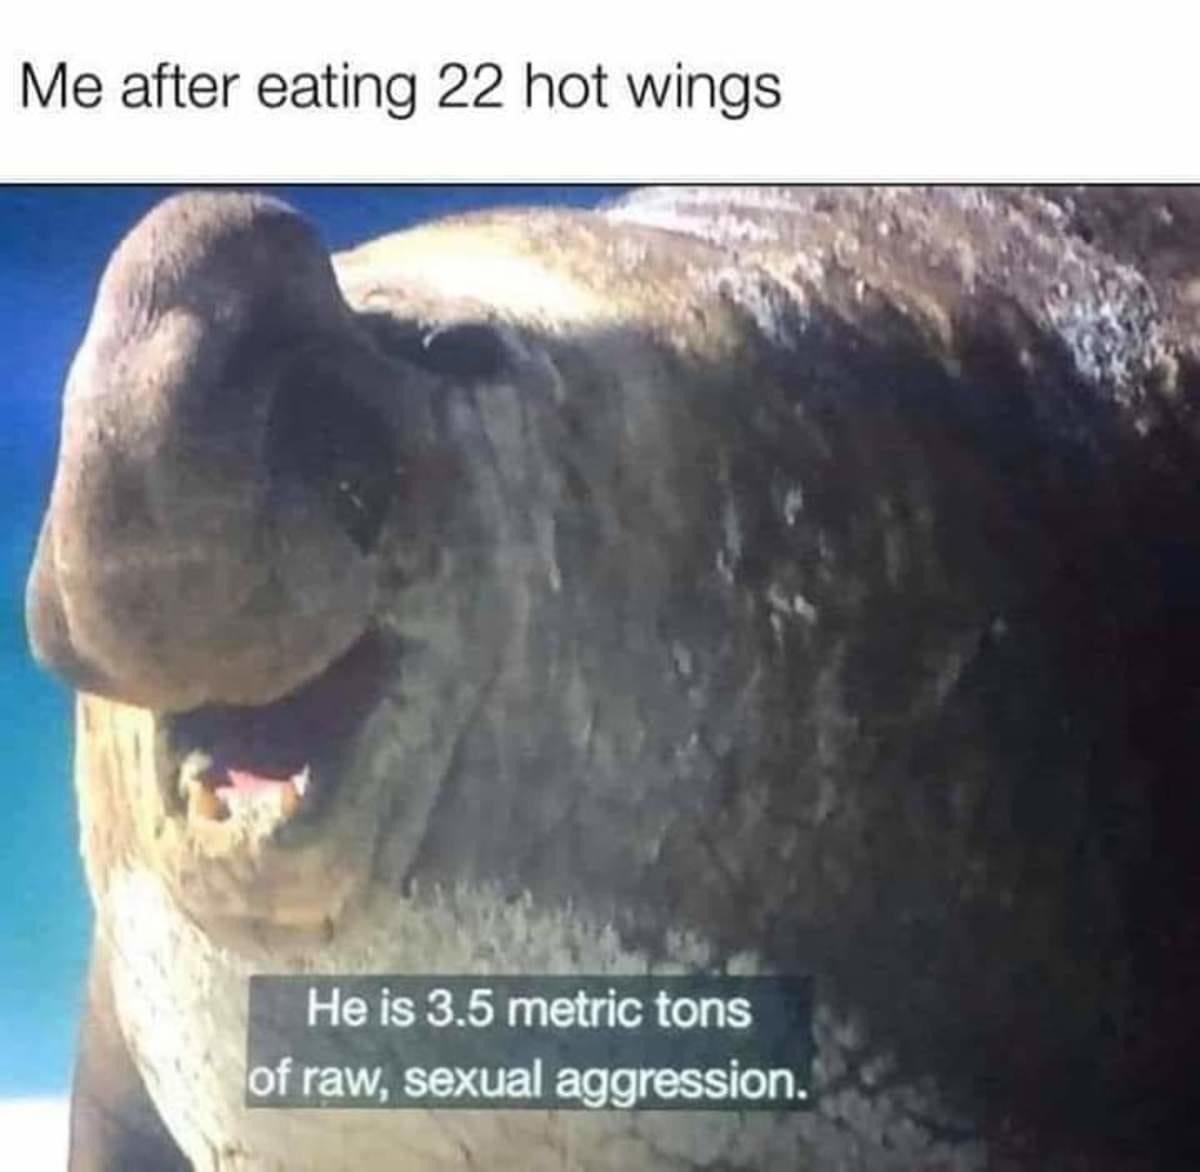 he is 3.5 metric tons of raw - Me after eating 22 hot wings He is 3.5 metric tons of raw, sexual aggression.